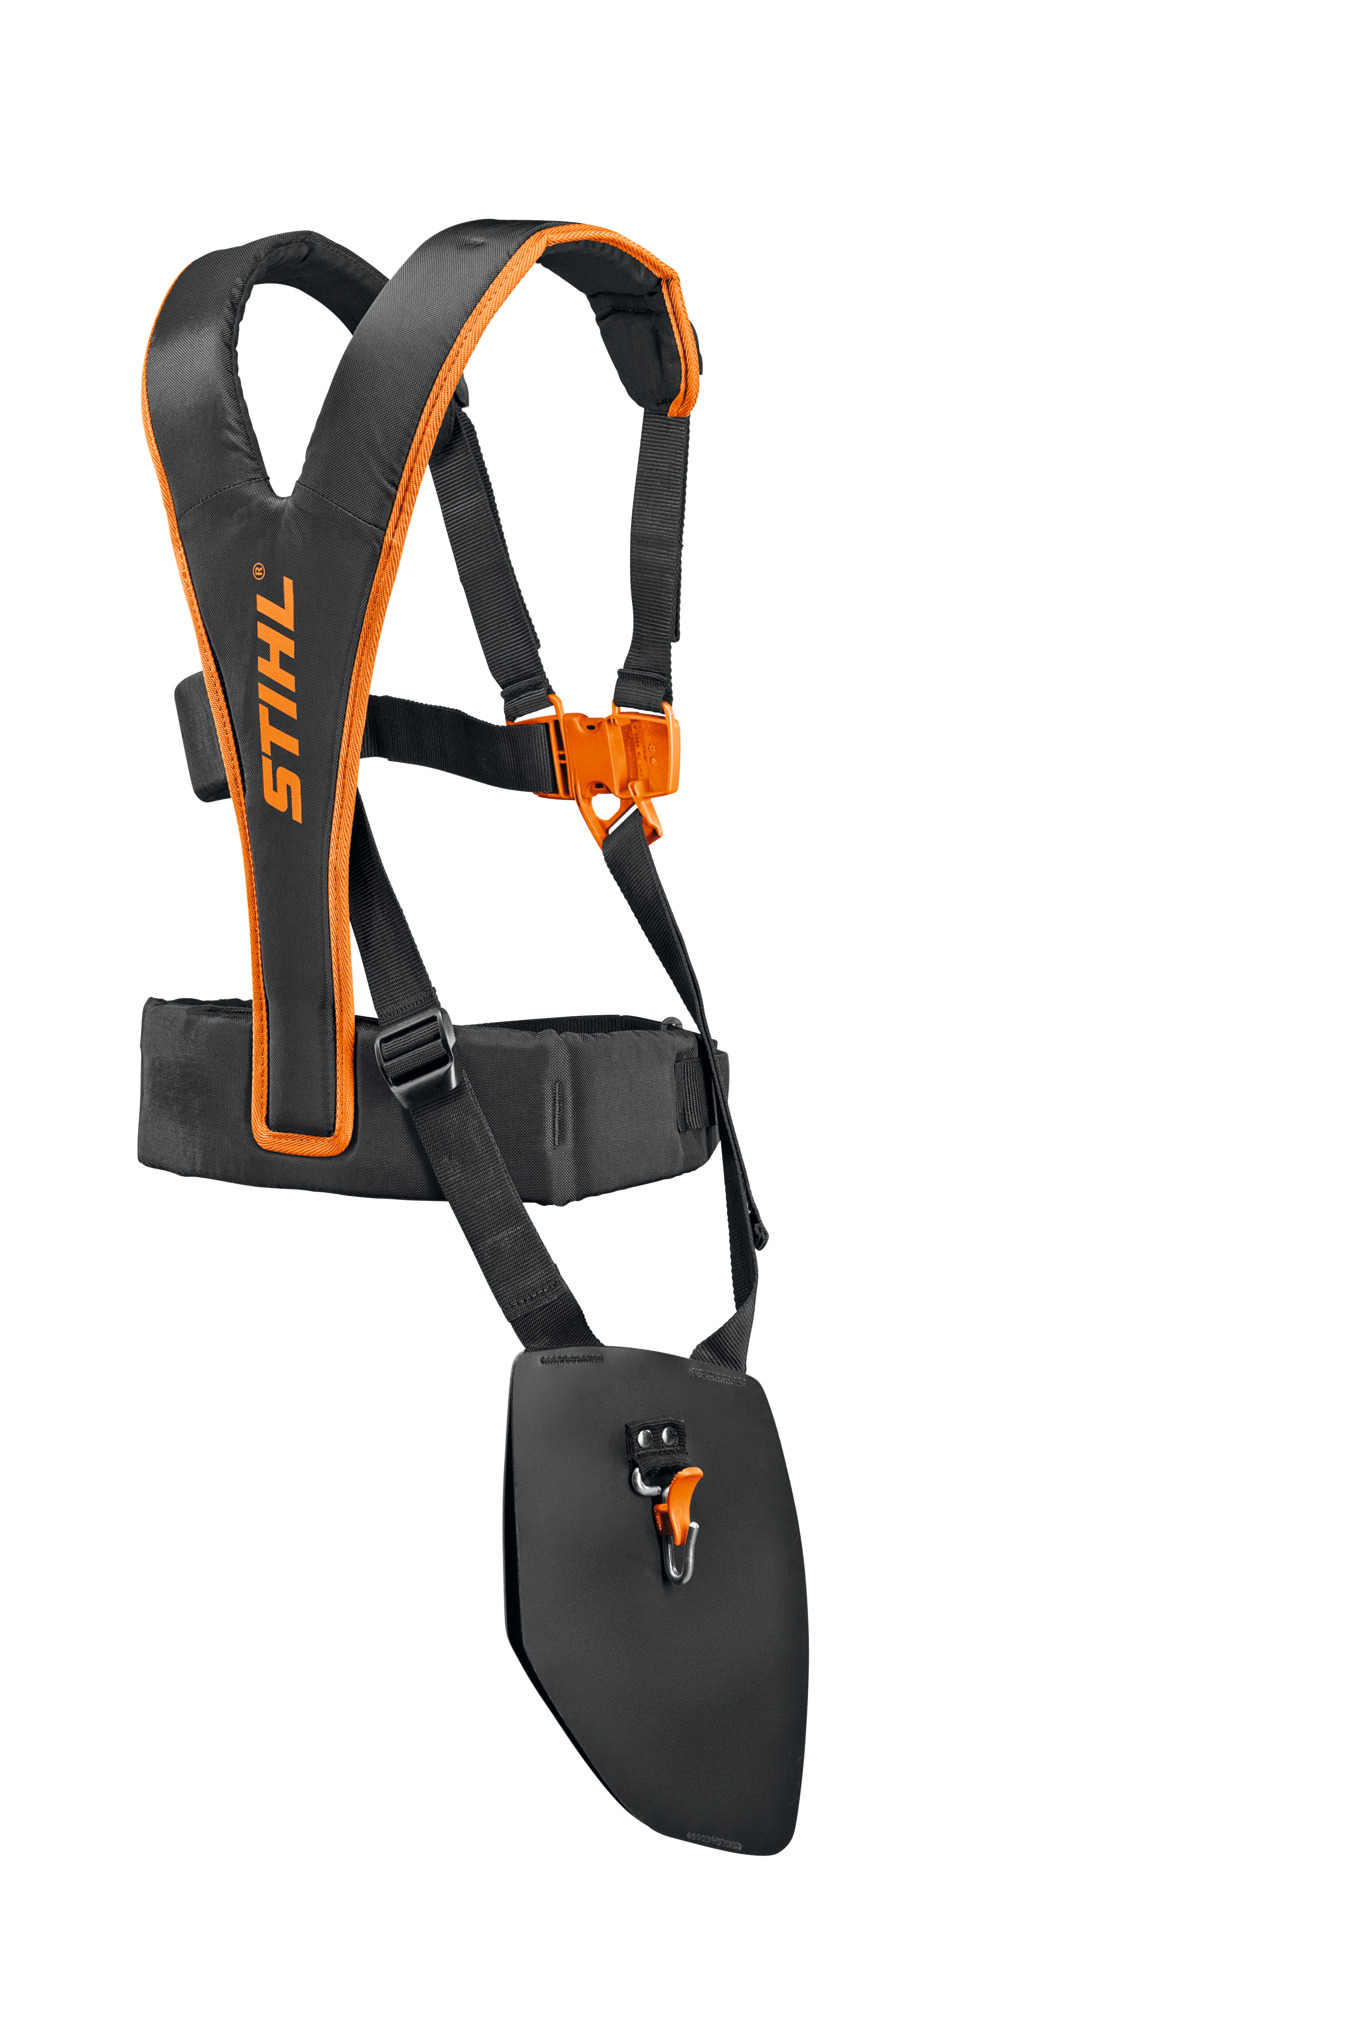 Advance Forestry Harness